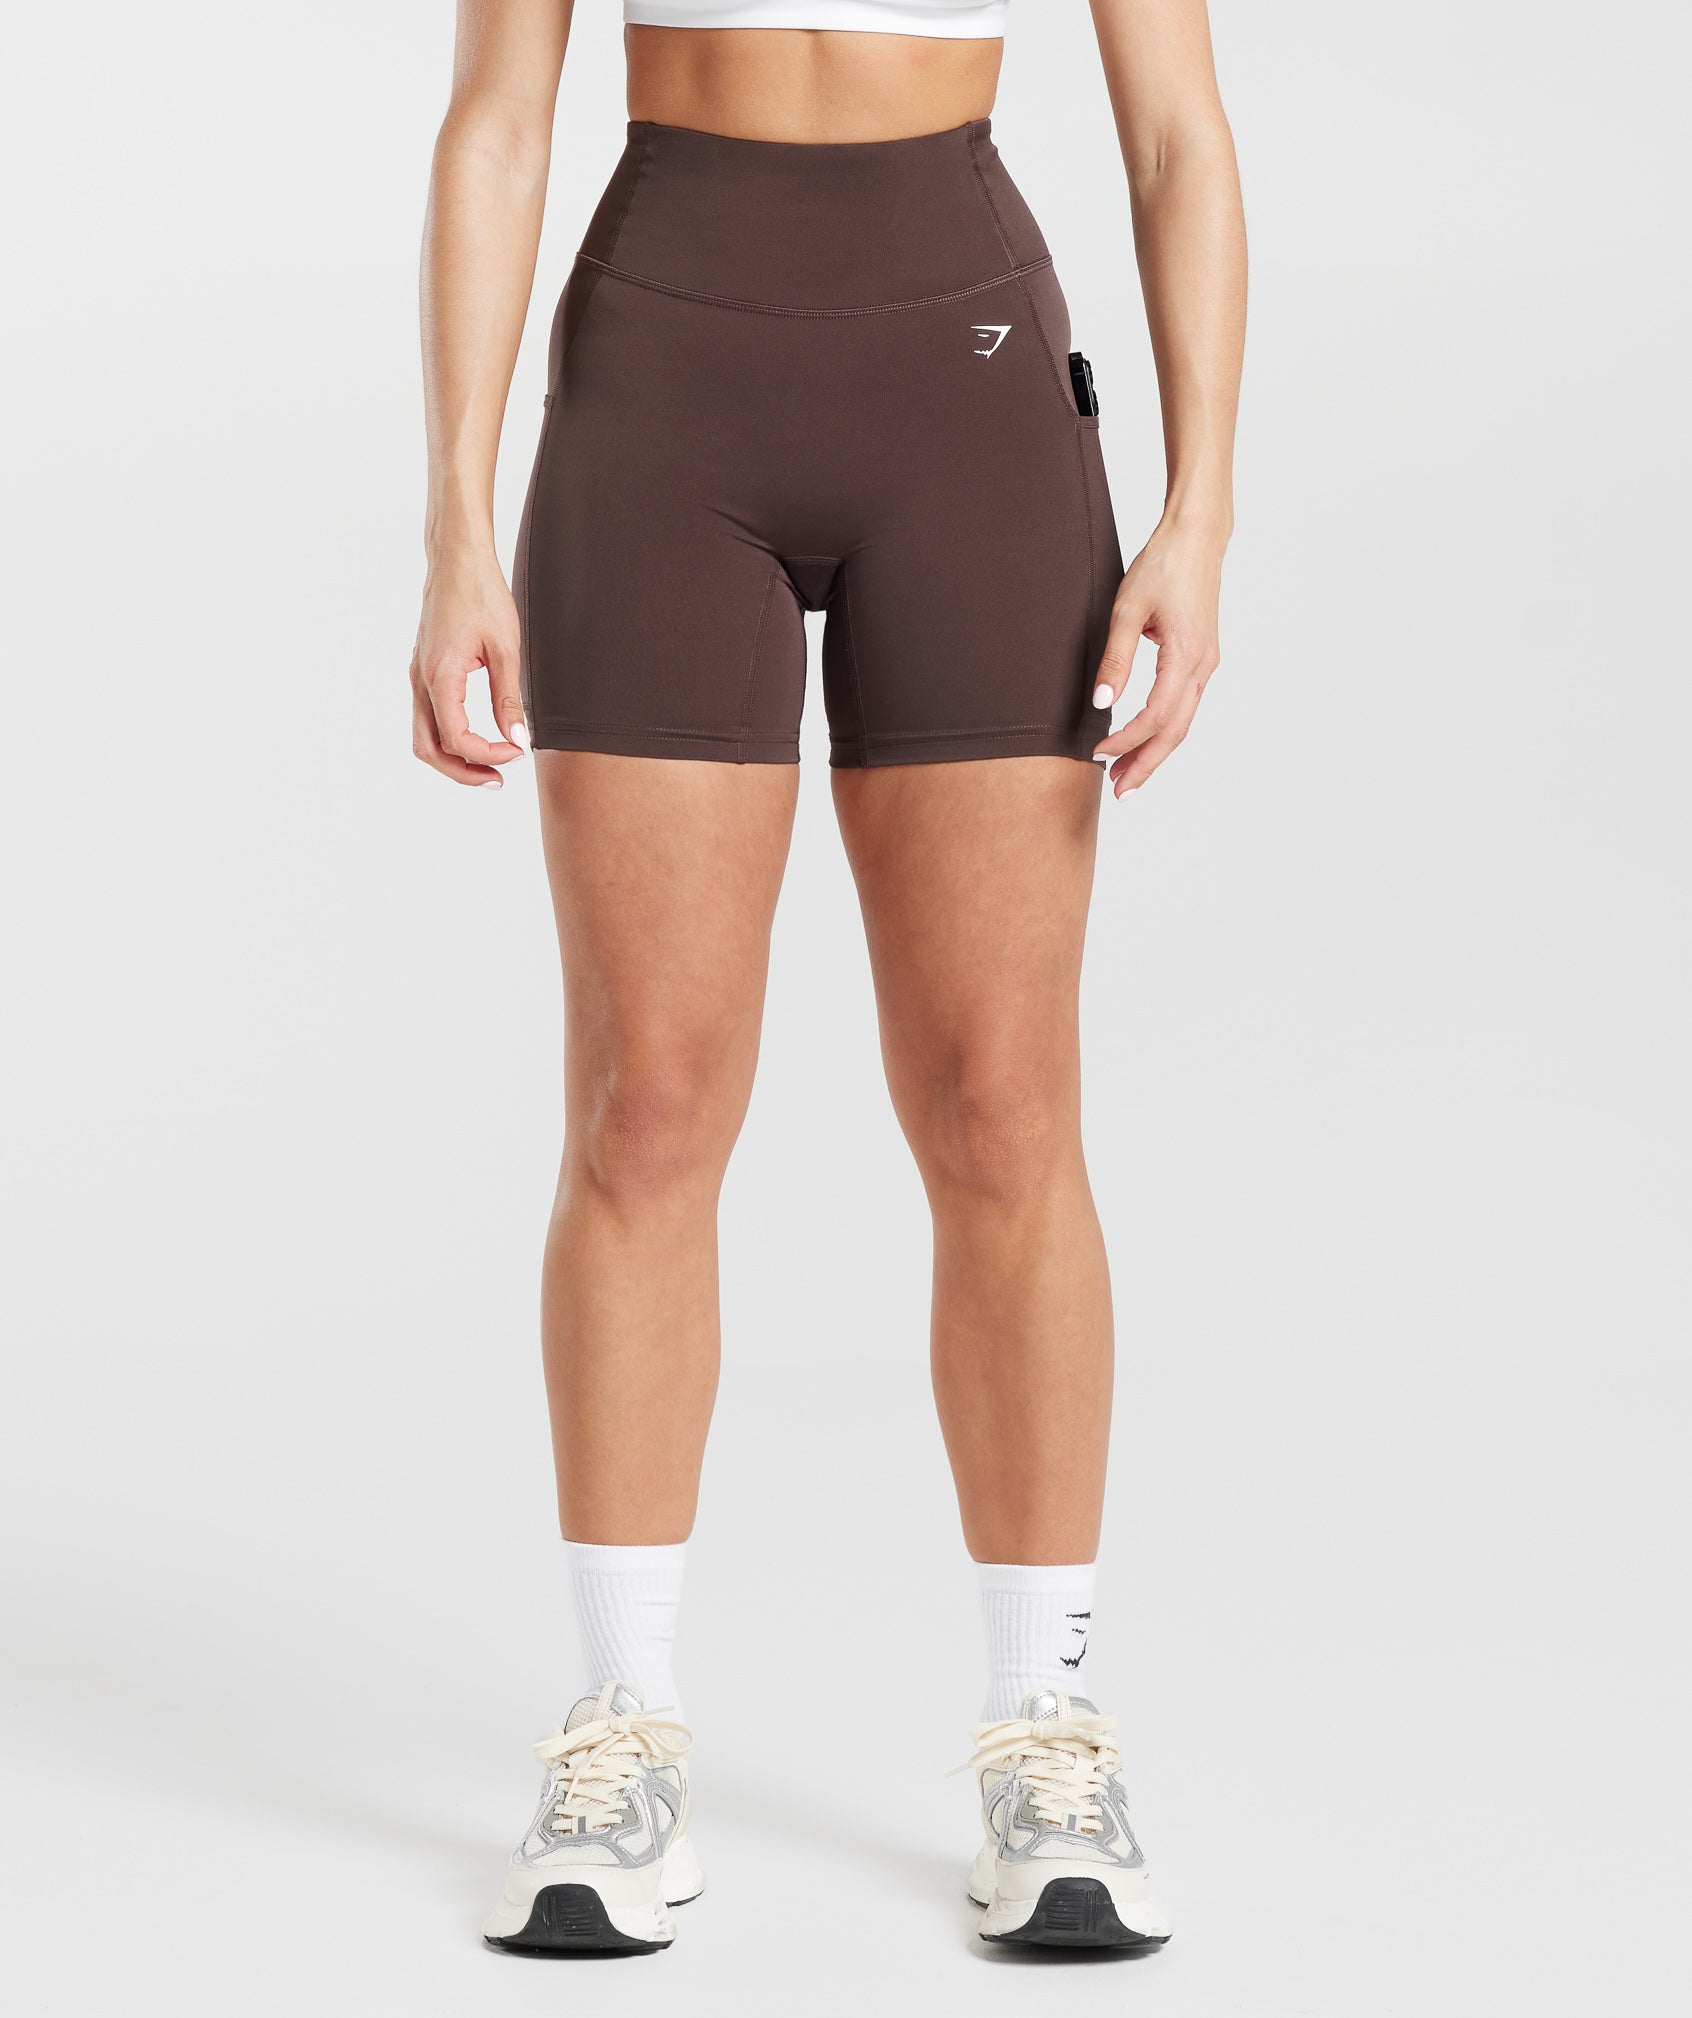 Pocket Shorts in Chocolate Brown